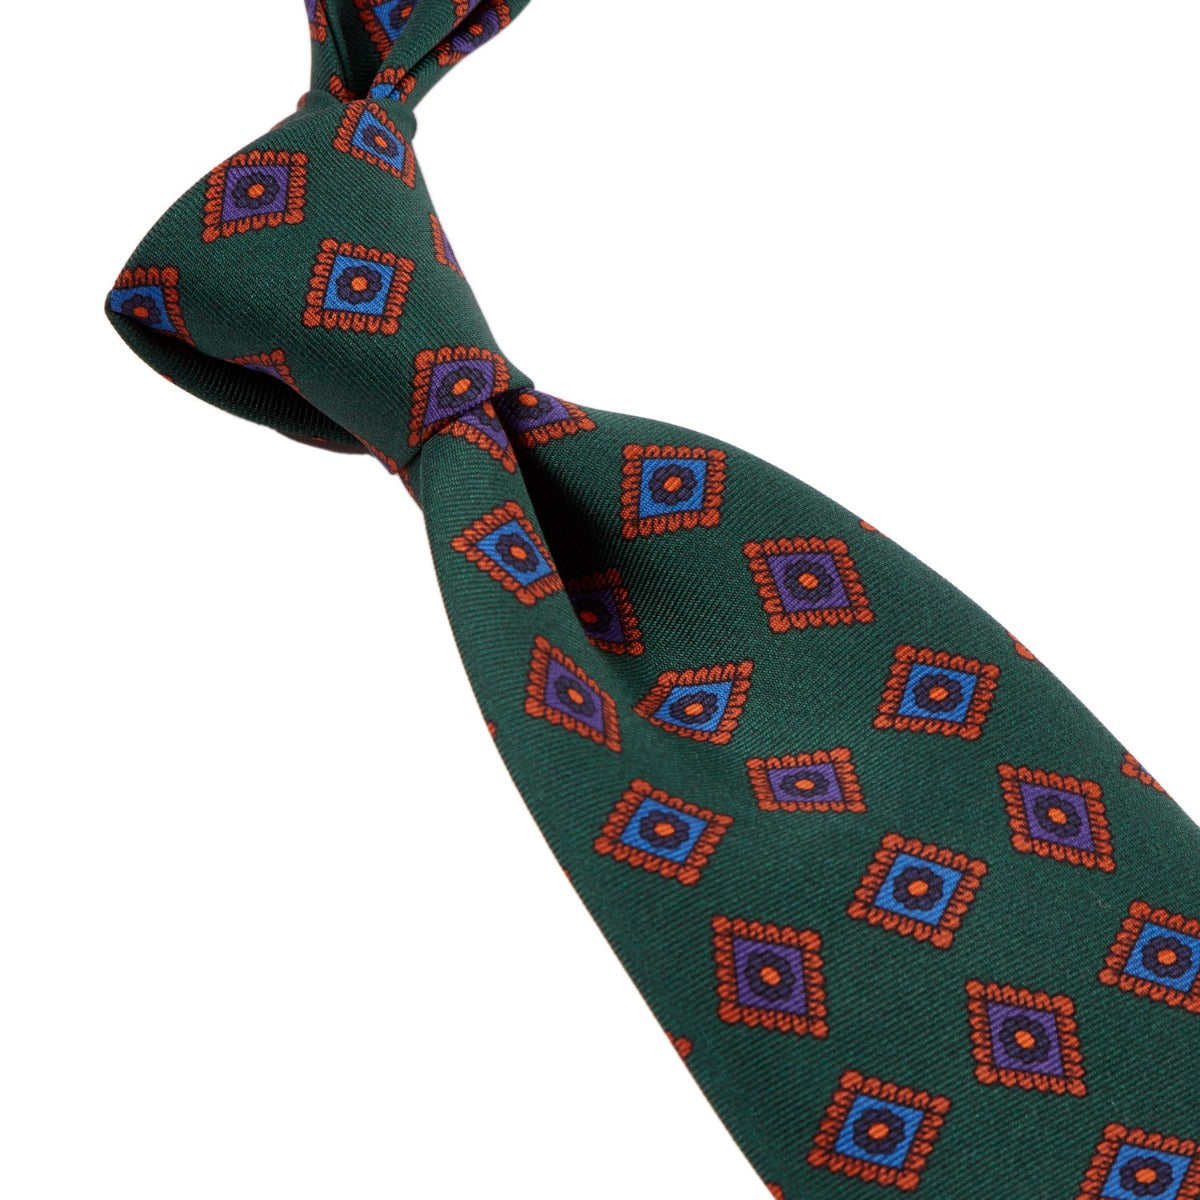 A Sovereign Grade Forrest Green Art Deco Ancient Madder Silk Tie from KirbyAllison.com with a red, blue, and green pattern.